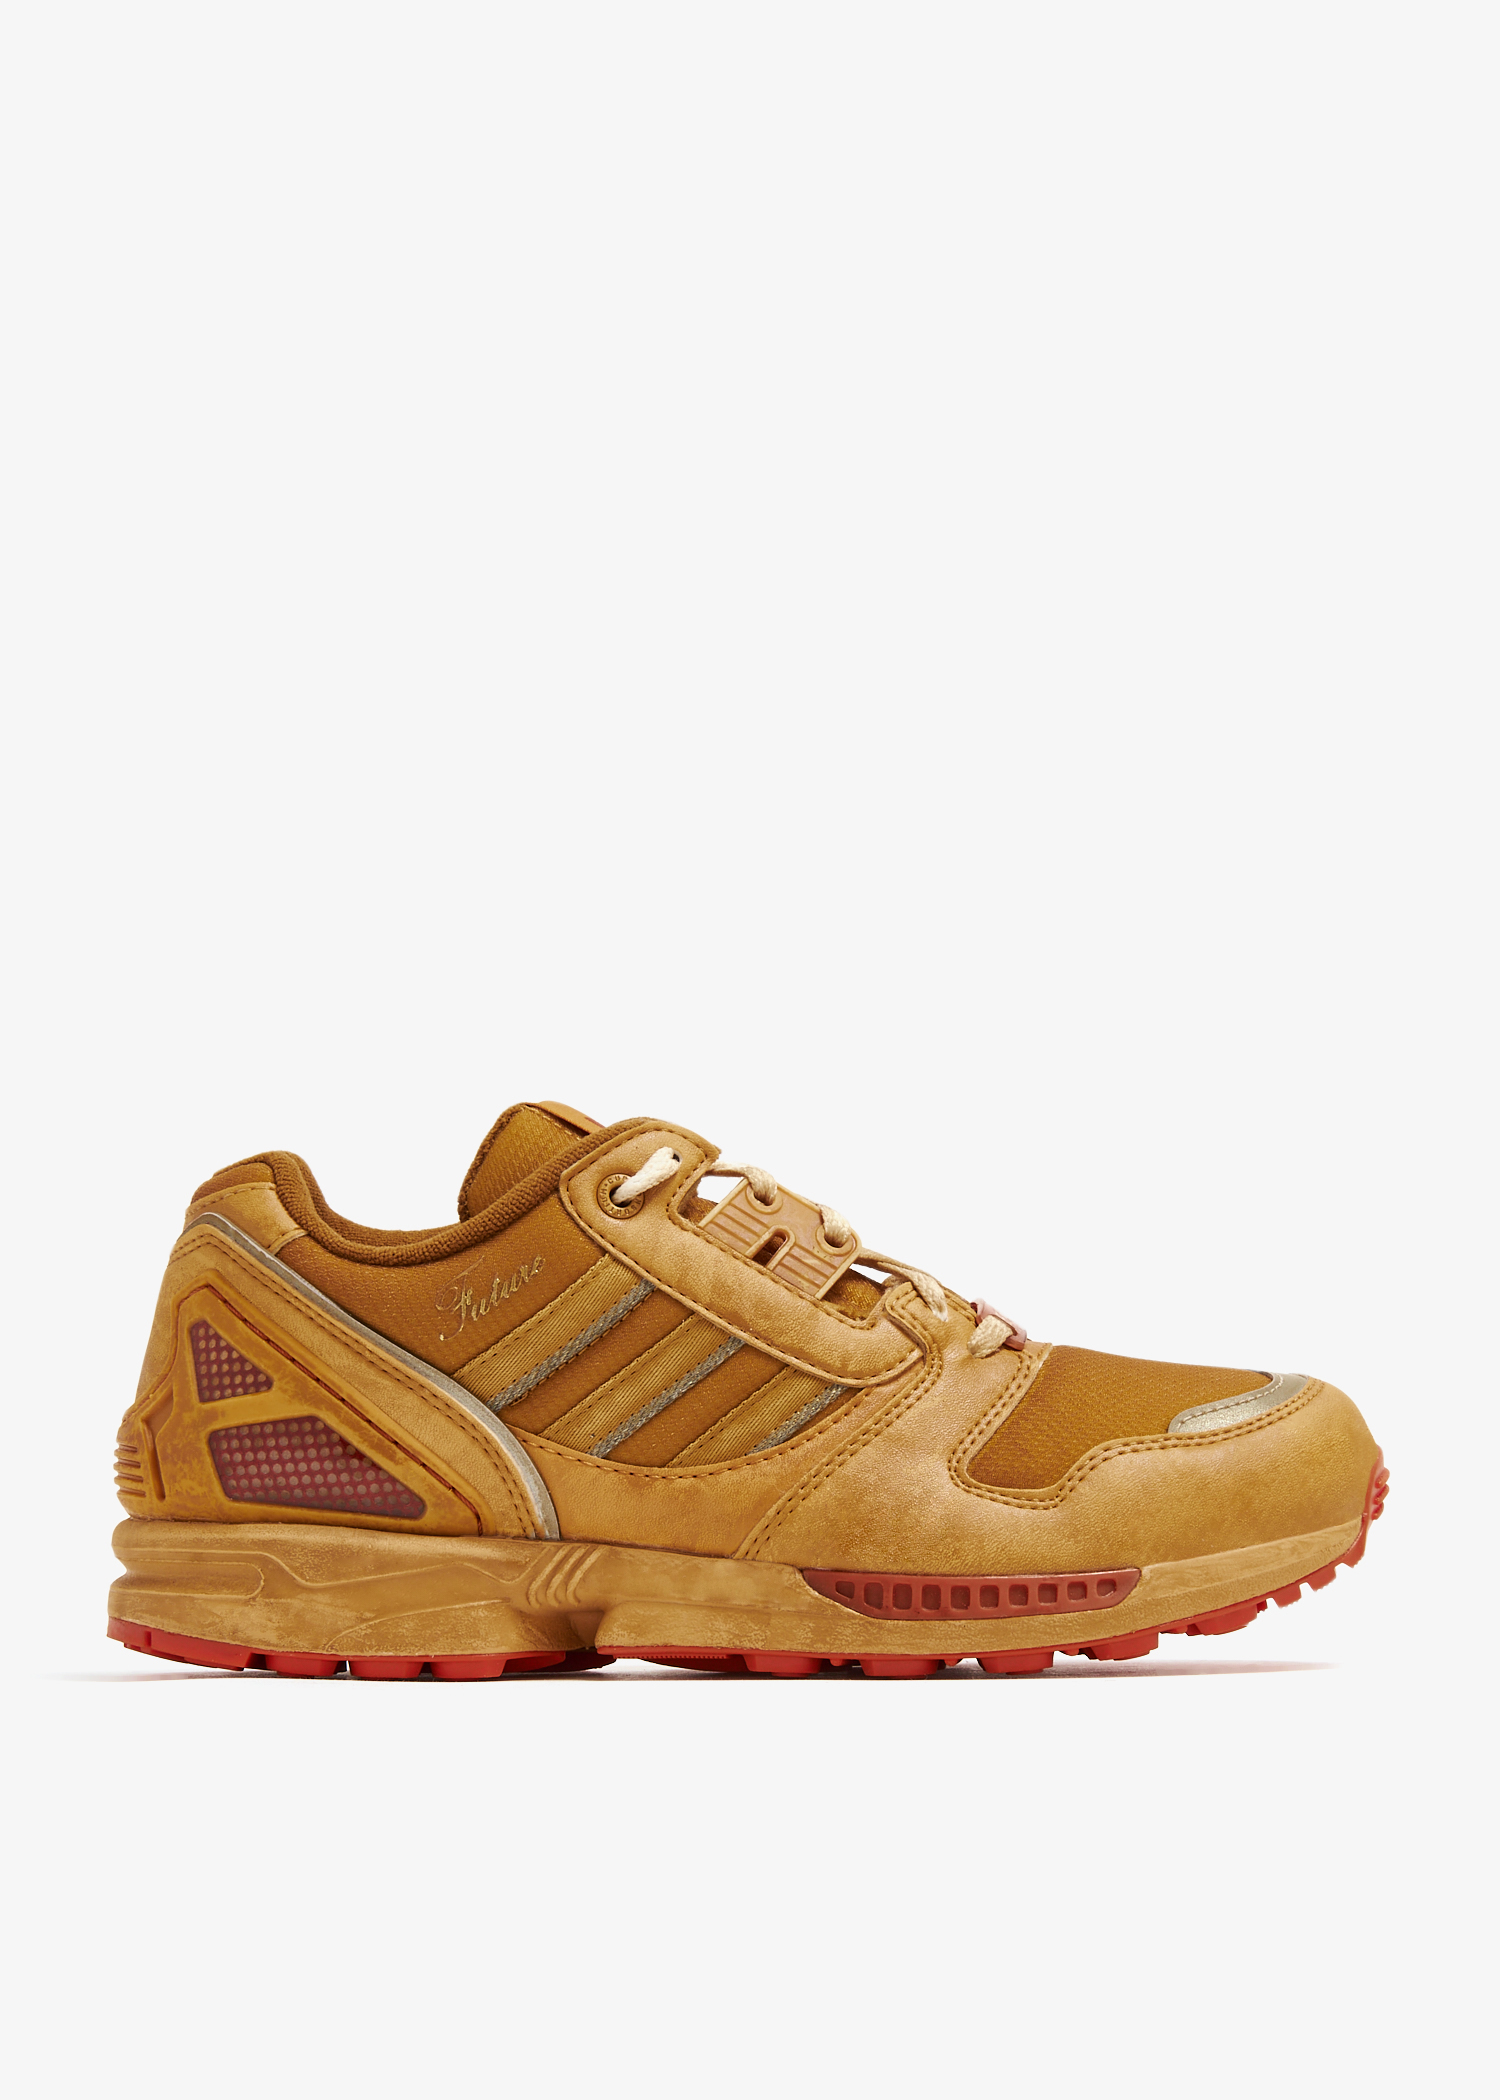 Adidas x END. ZX 8000 'Consortium Cup' sneakers for Men - Yellow 